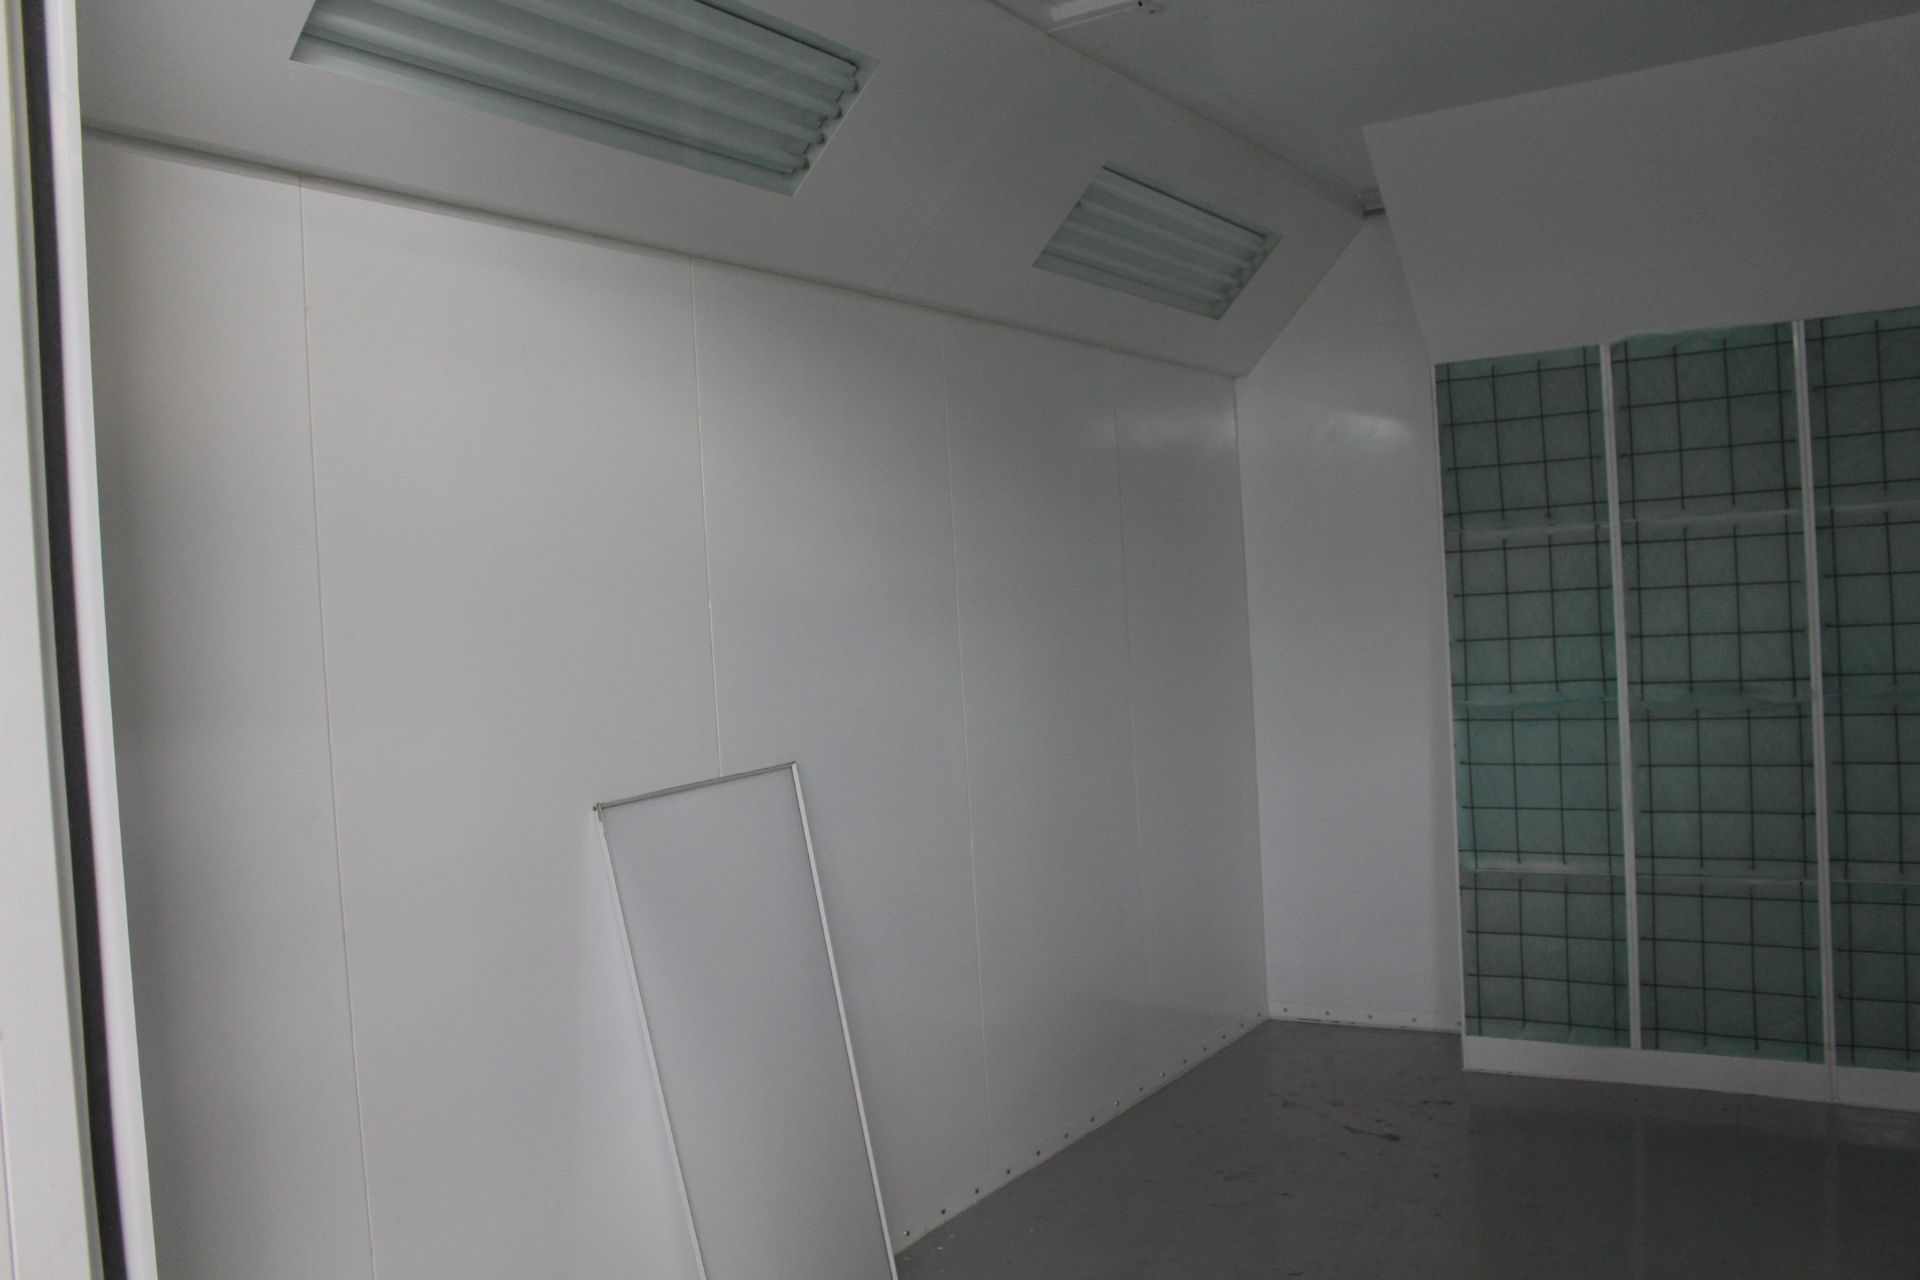 SPRAY ZONE PAINT SPRAY BOOTH, BRAND NEW, 169" LONG X 143" WIDE INSIDE DIMENSION - Image 15 of 15